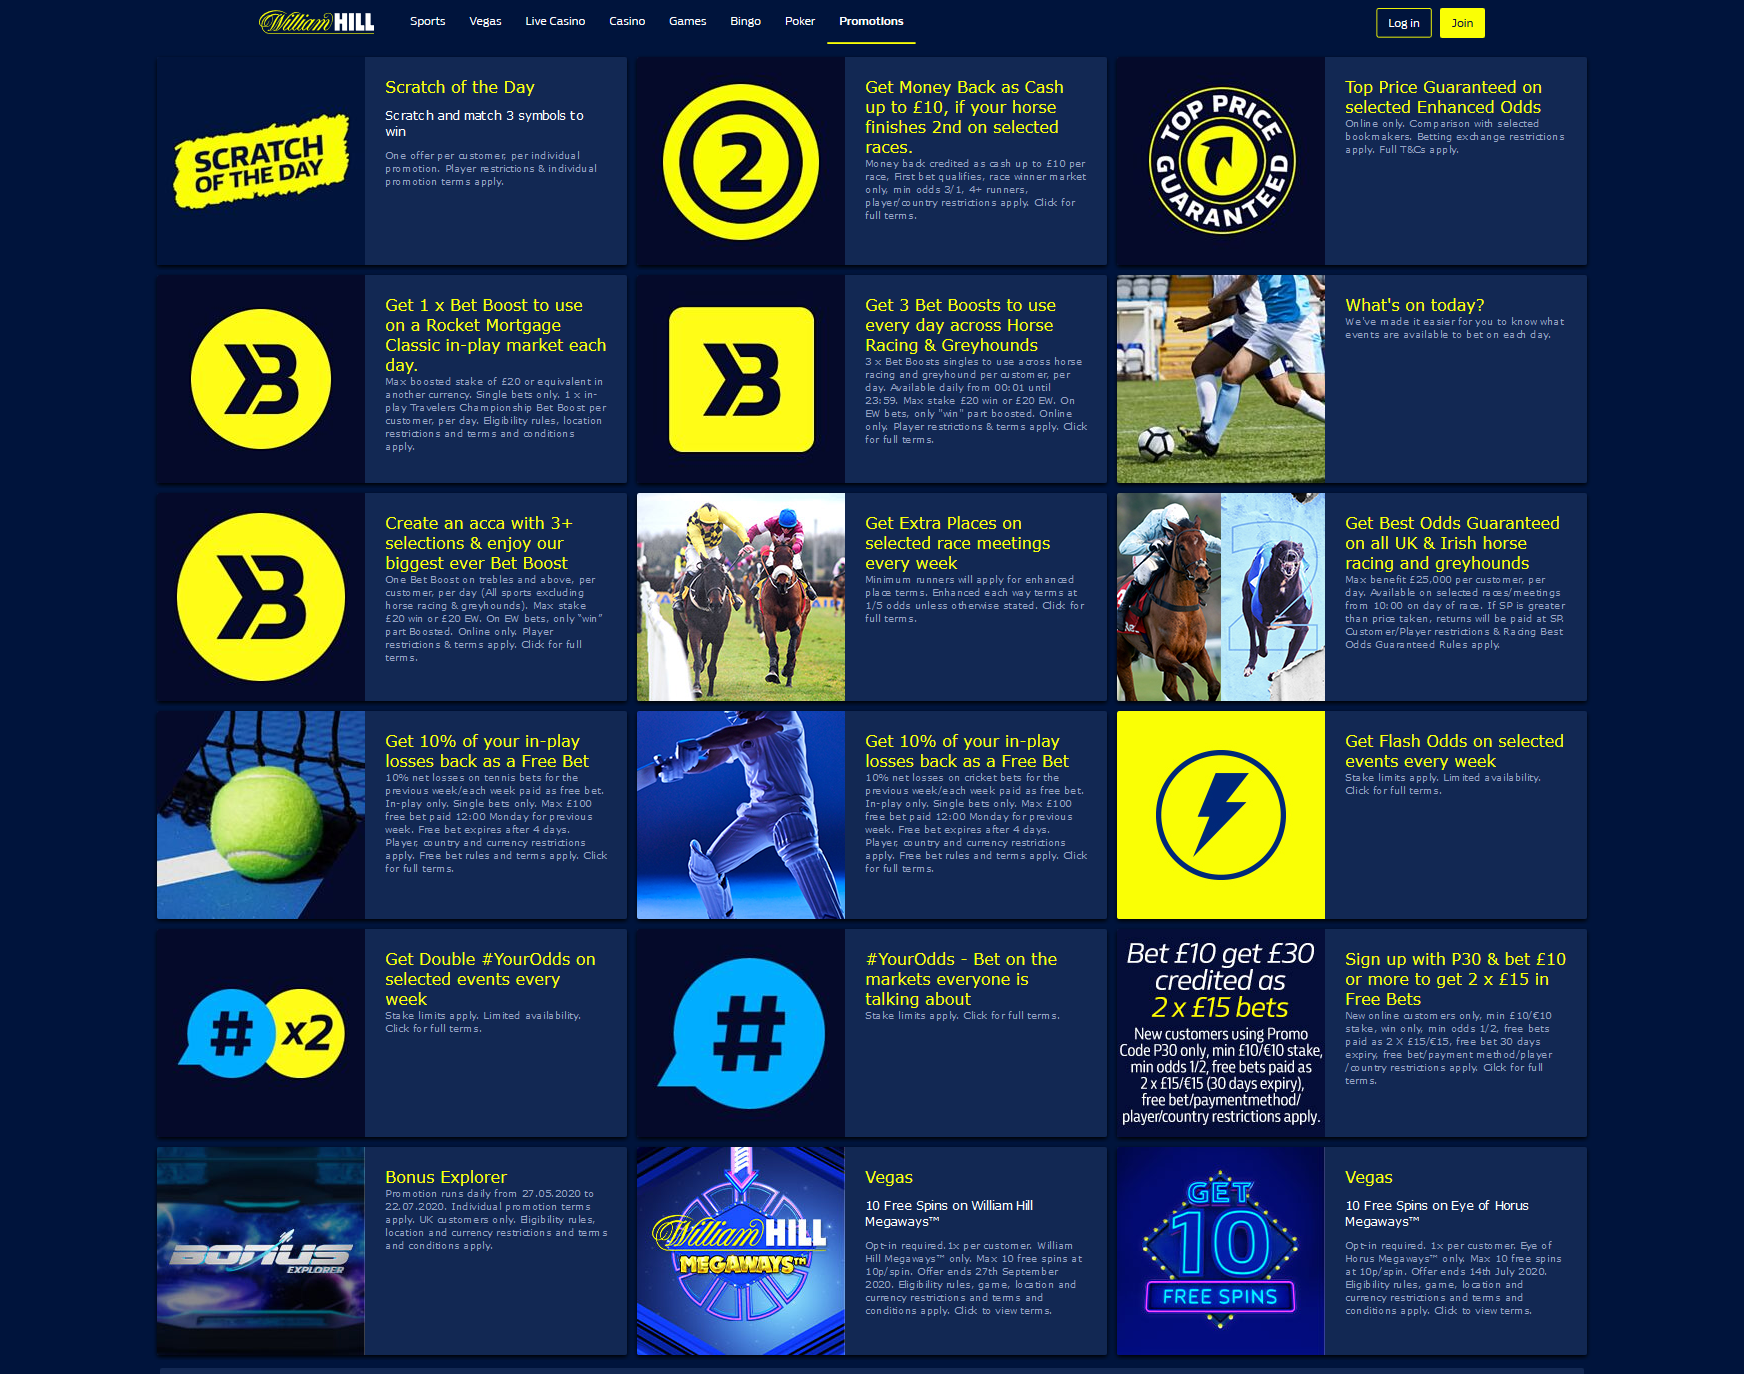 bookmaker william hill bonuses and promotions